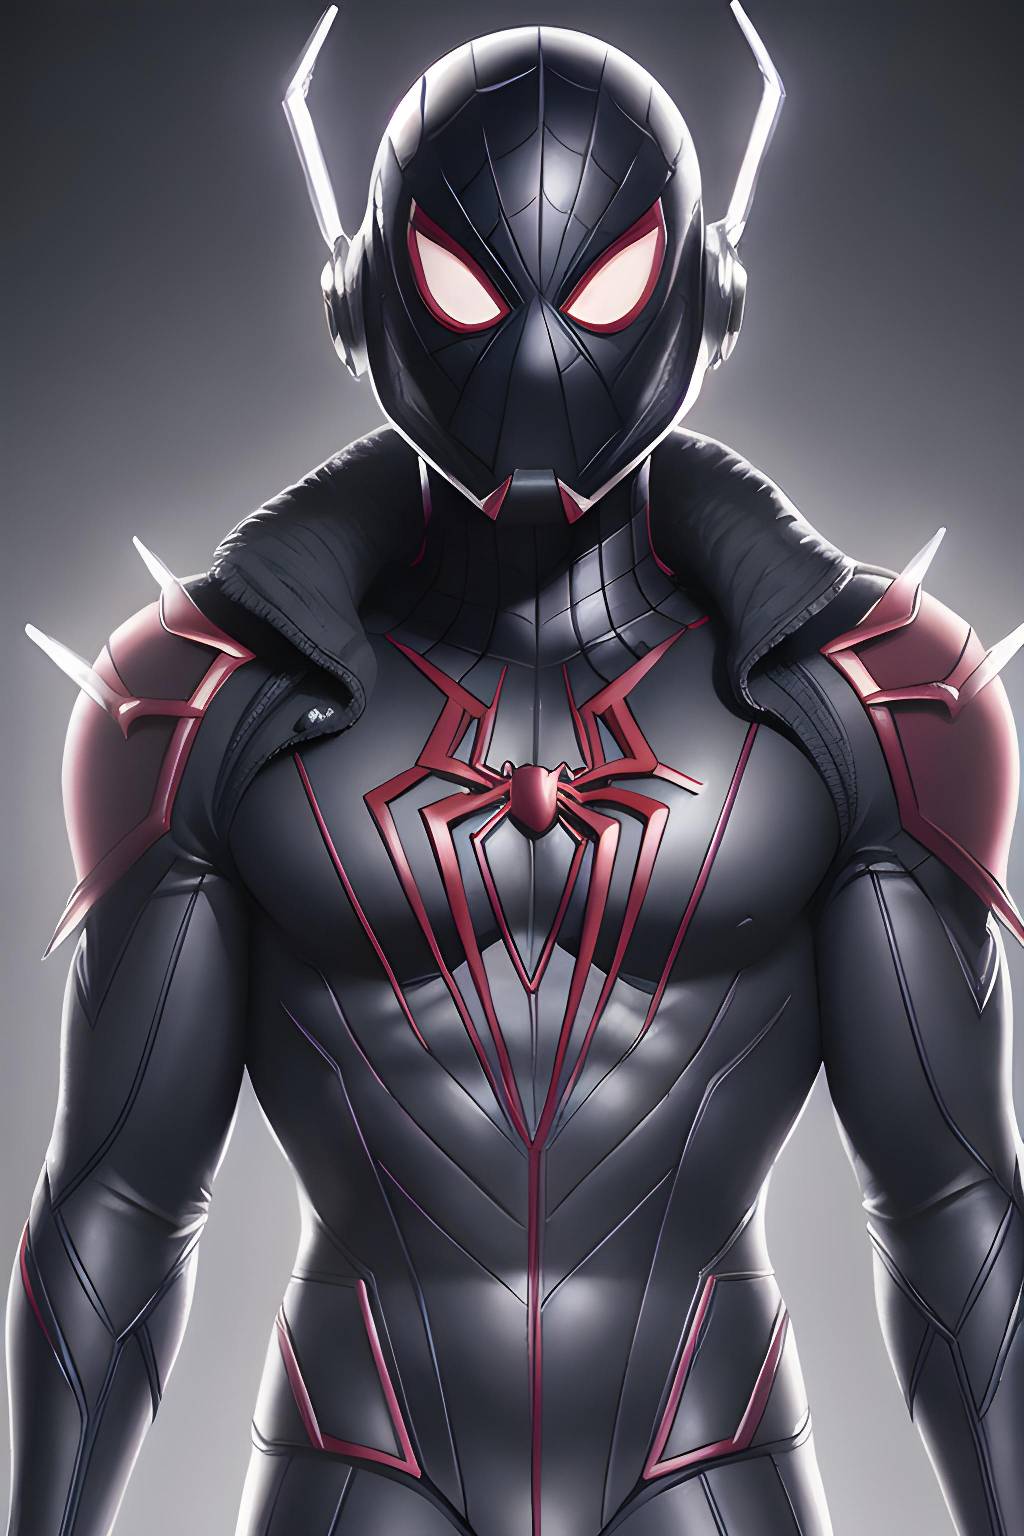 Ultron Spiderman by Diulga07aiart on DeviantArt